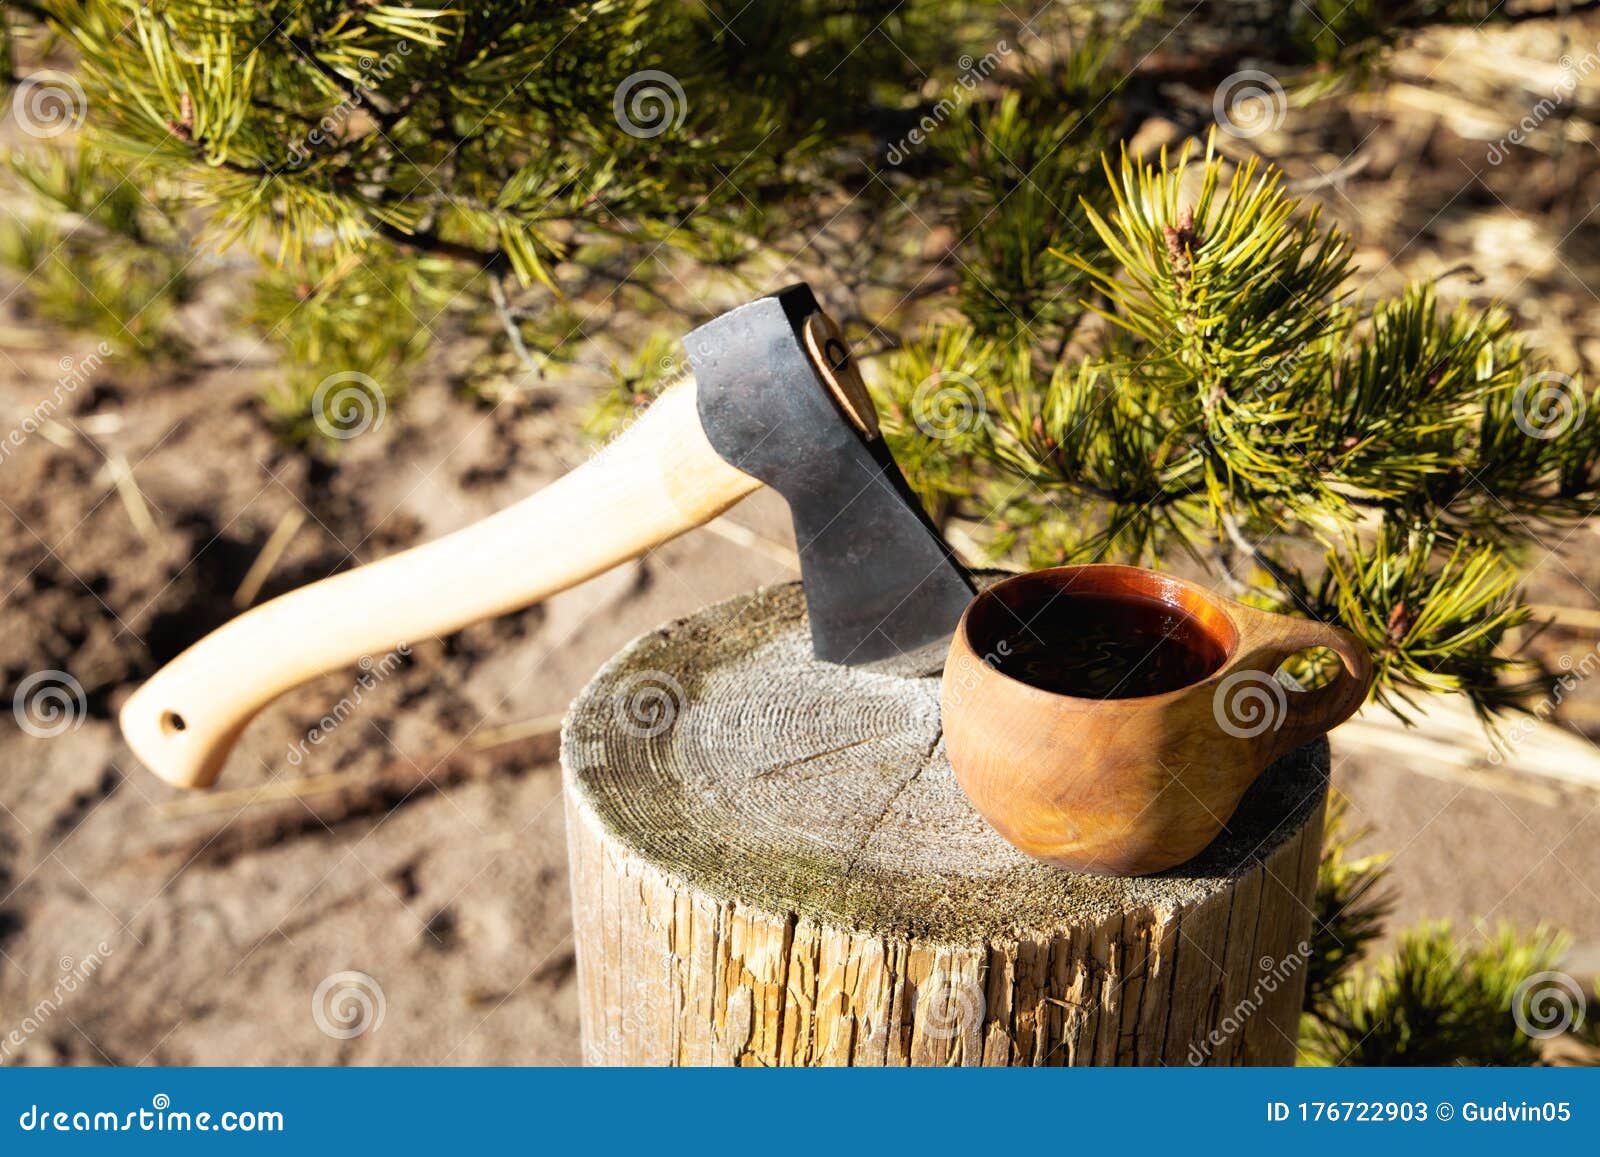 View of Camp Axe and Cup of Tea in a Forest. Bush Craft Concept. Stock  Image - Image of cooking, firewood: 176722903